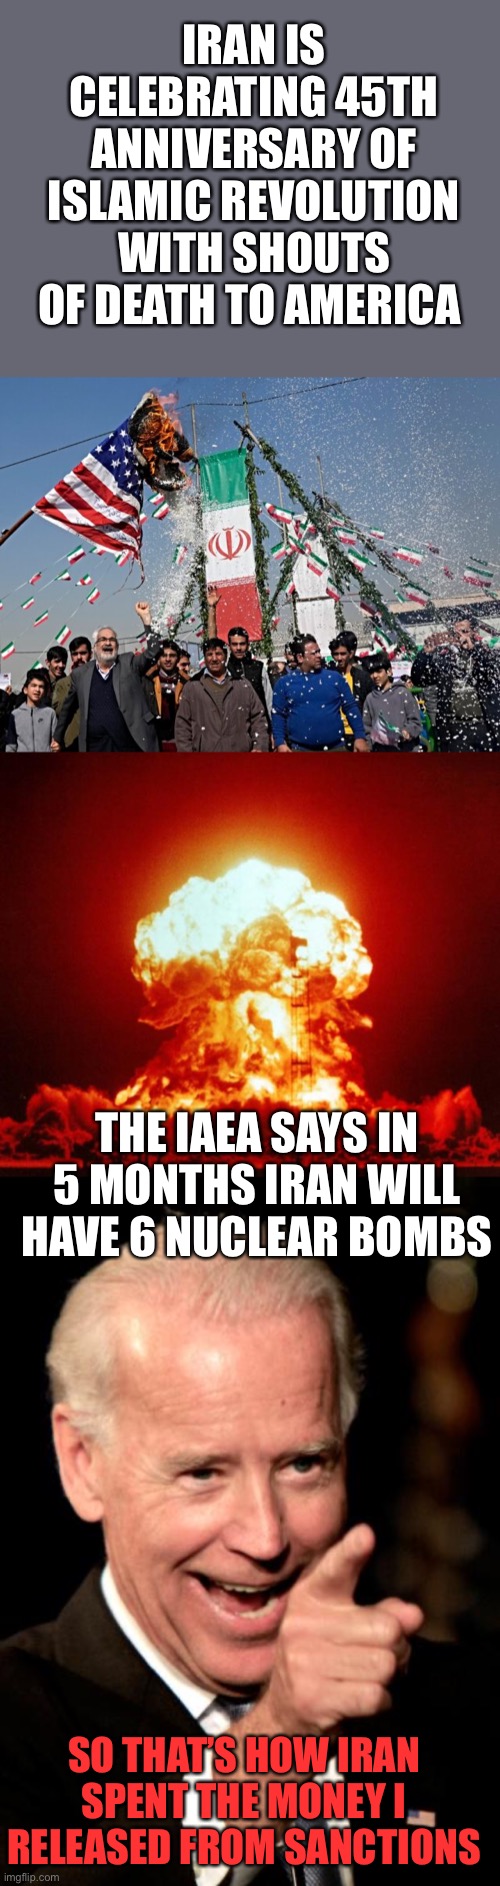 Aiding the enemy is treason.No malarkey, Joe. | IRAN IS CELEBRATING 45TH ANNIVERSARY OF ISLAMIC REVOLUTION WITH SHOUTS OF DEATH TO AMERICA; THE IAEA SAYS IN 5 MONTHS IRAN WILL HAVE 6 NUCLEAR BOMBS; SO THAT’S HOW IRAN SPENT THE MONEY I RELEASED FROM SANCTIONS | image tagged in nuke,smilin biden,iran,treason,aid enemy | made w/ Imgflip meme maker